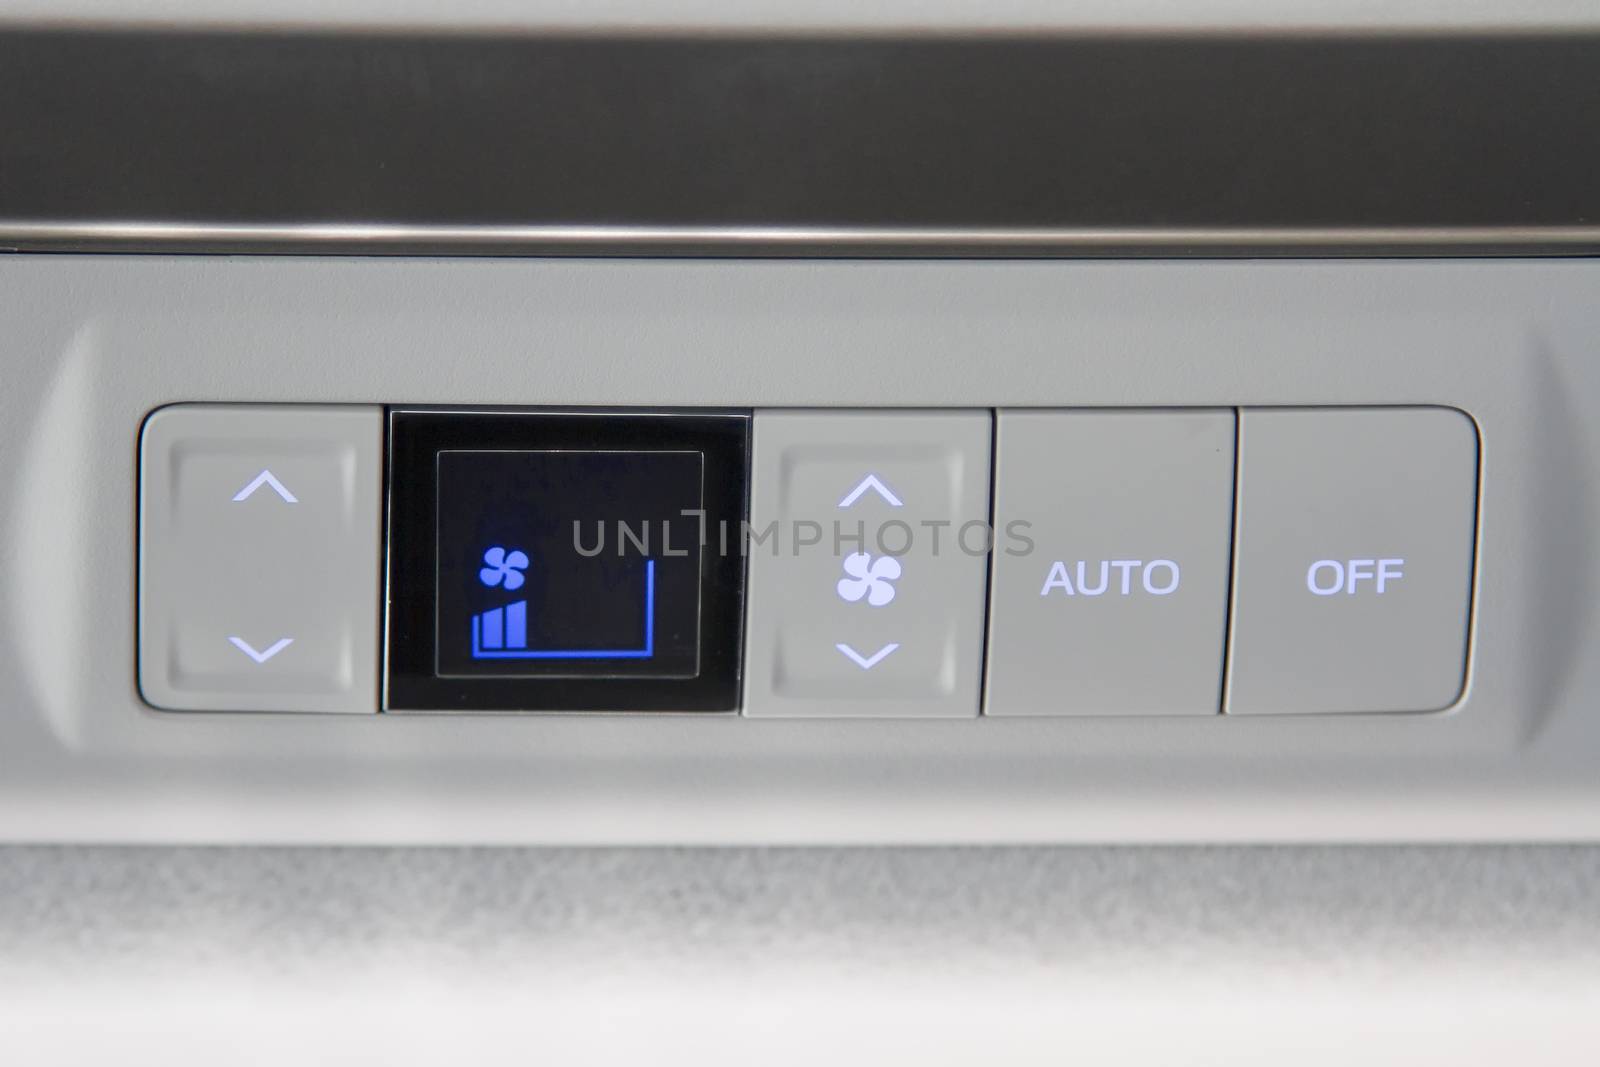 Button to open the air in the car, fan button, auto button